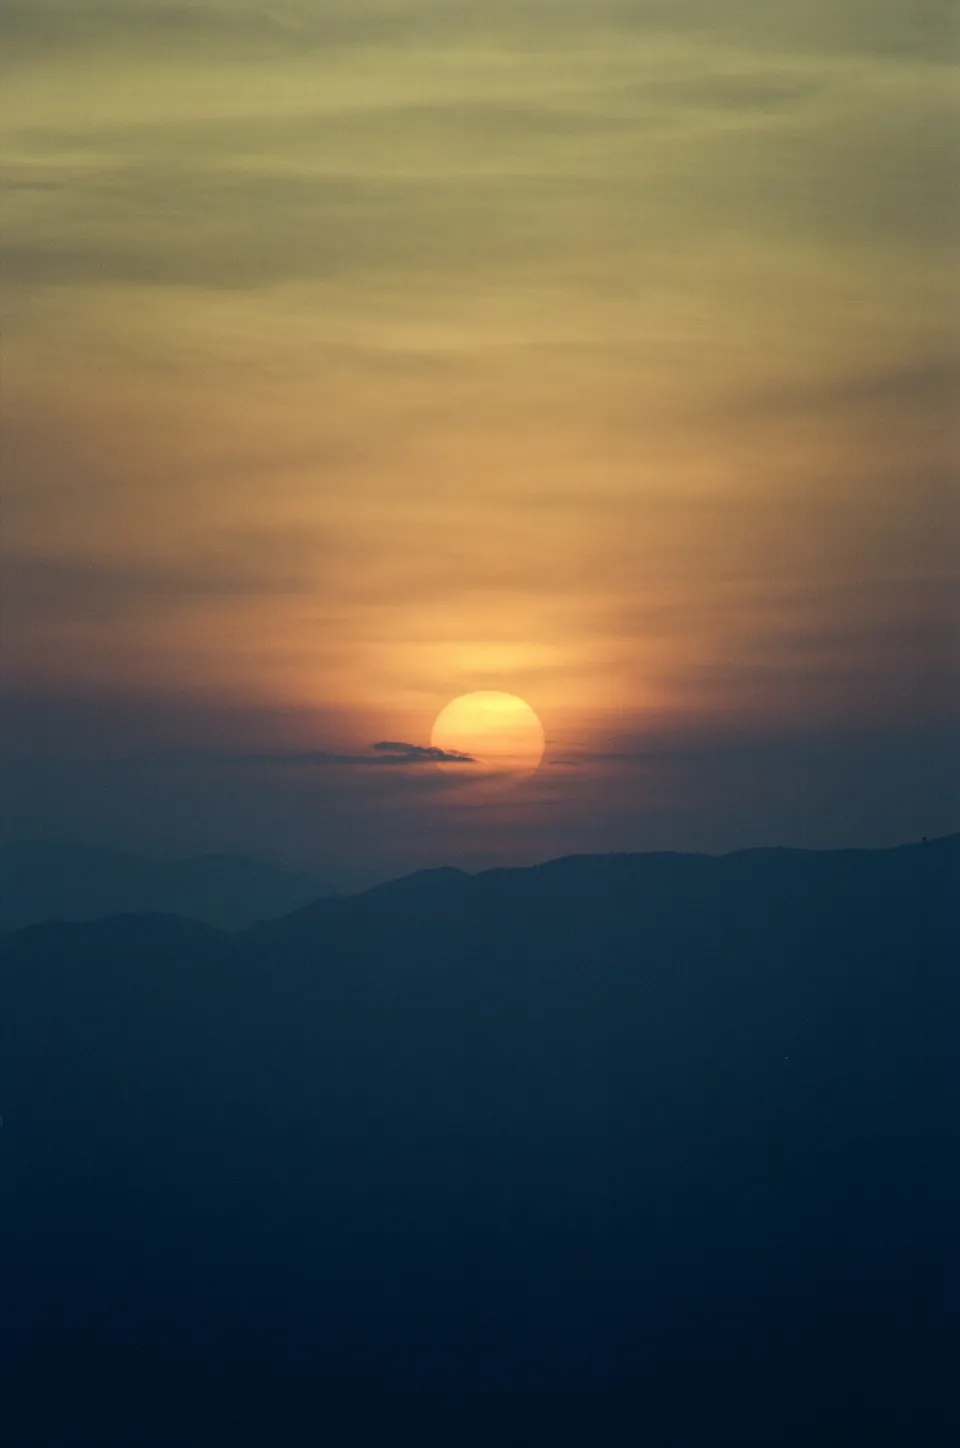 Sunset at 300mm